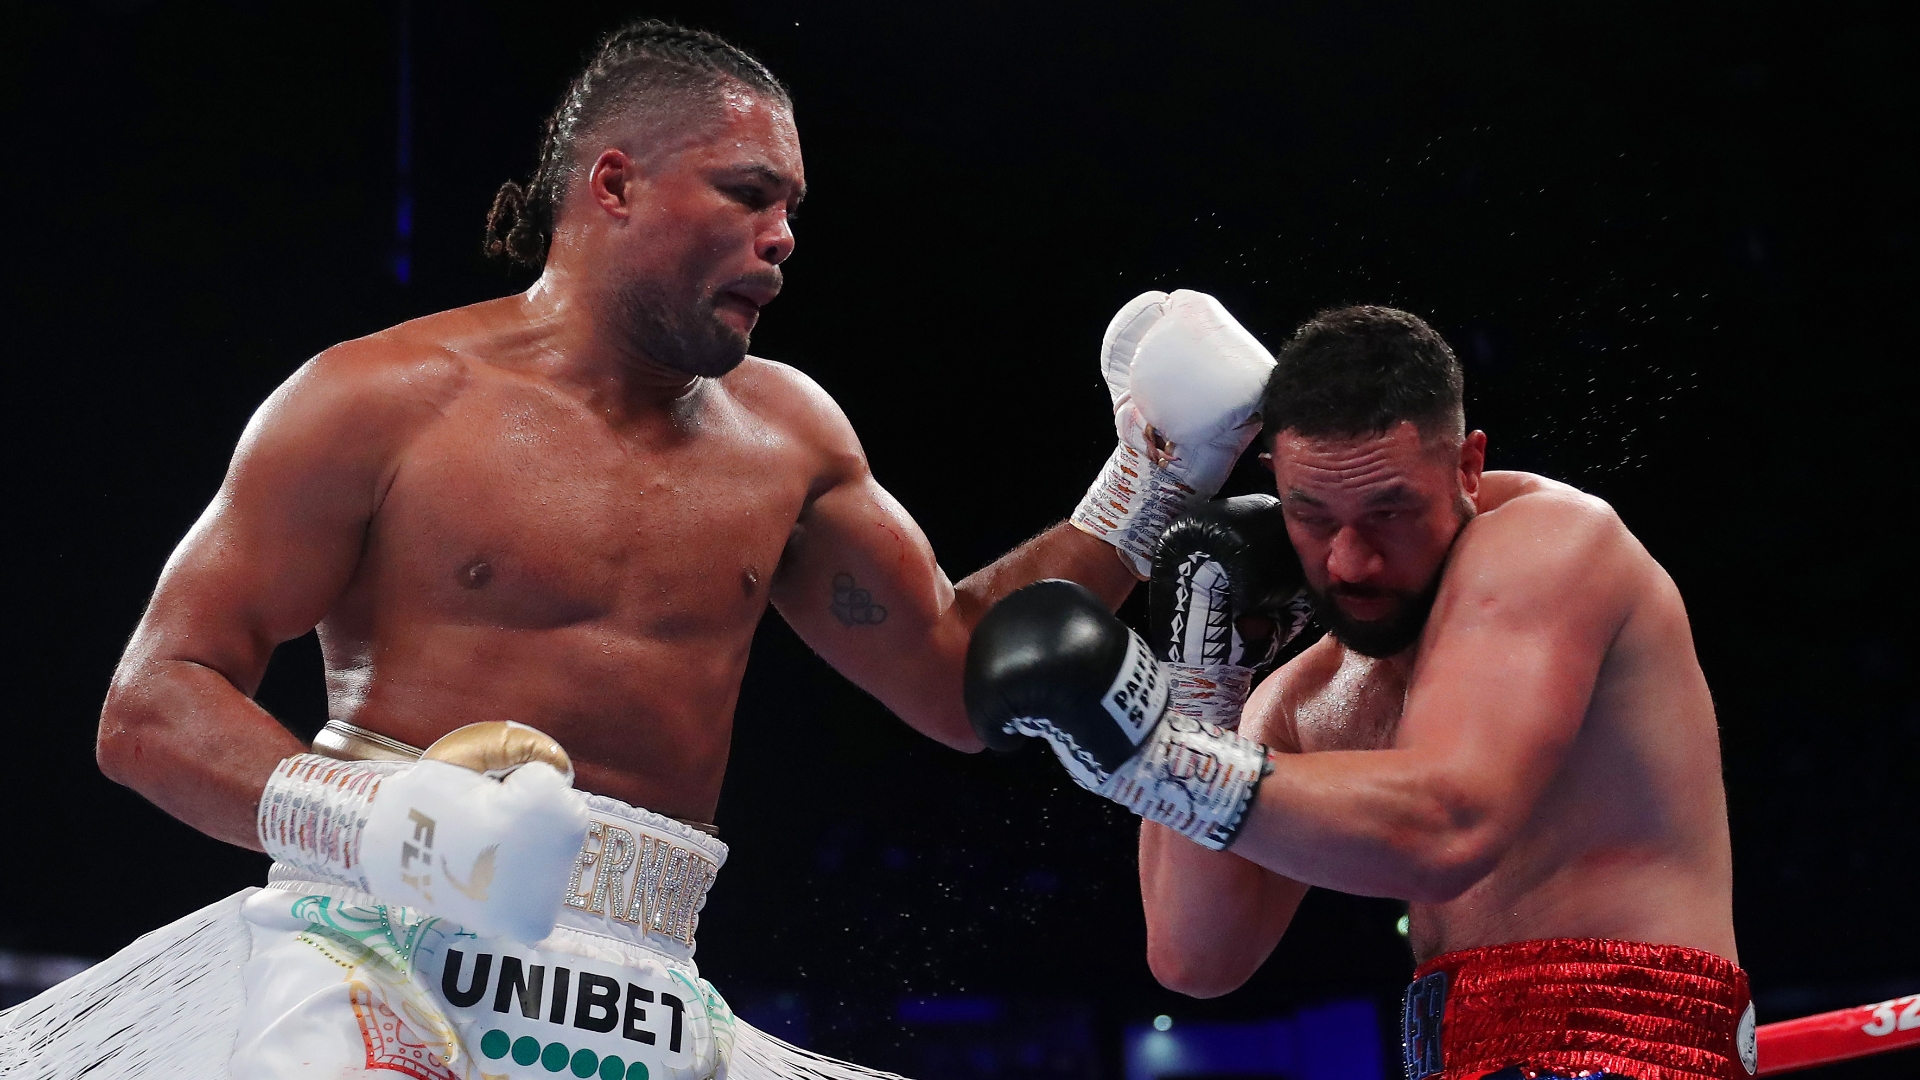 Joe Joyce knocks out Joseph Parker with one punch - Stream the Video